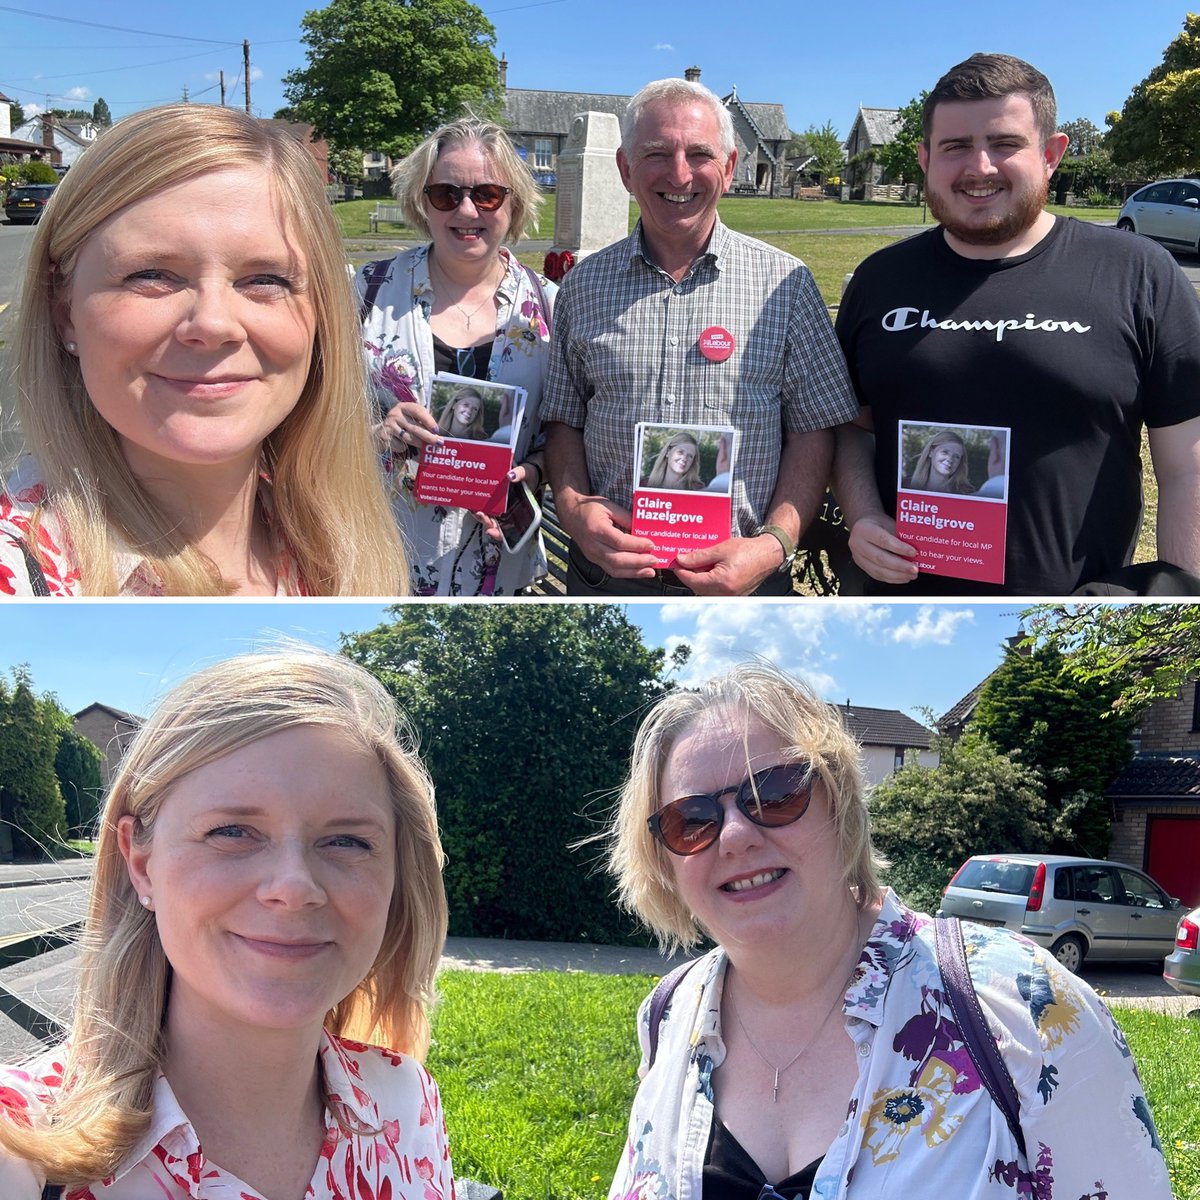 We’ve been out on the ☀️ #LabourDoorstep all day in Stoke Gifford, listening to local people’s priorities.

Big thanks to everyone who took the time to speak with us - there’s a real hope for change.

Wonderful to be joined by @Lucy_Exmoor, Joe and David - thank you!